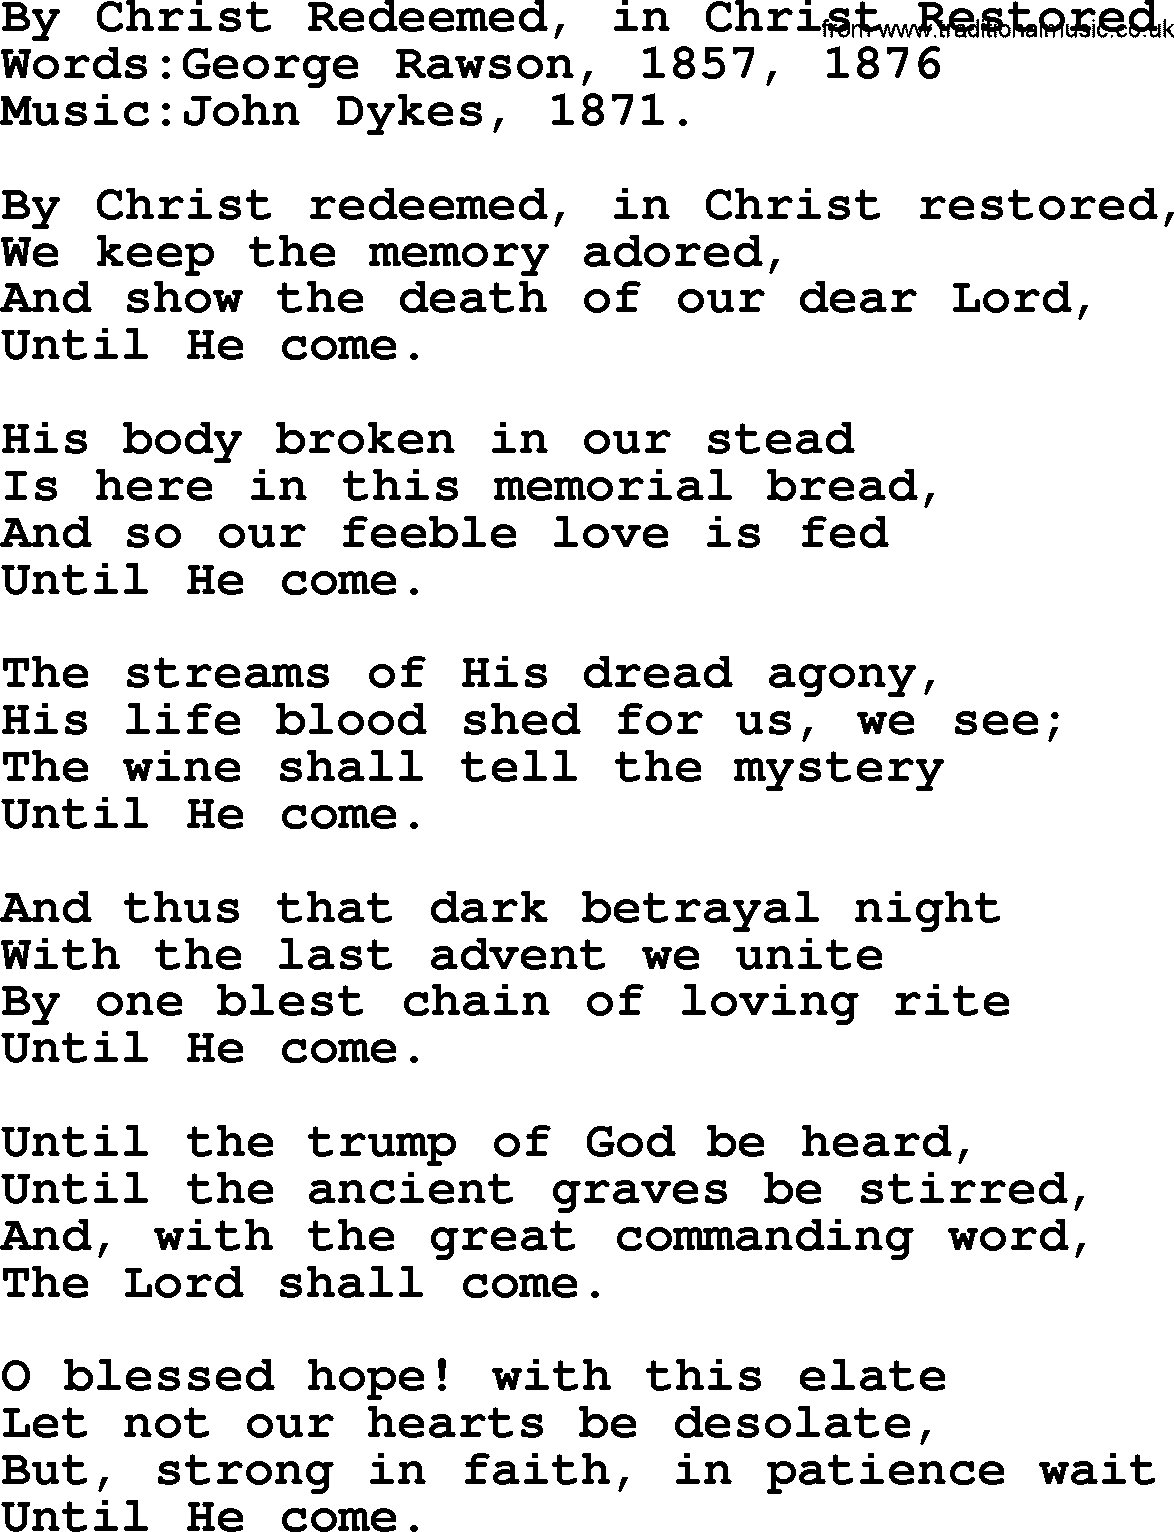 Christian hymns and song lyrics for Communion(The Eucharist): By Christ Redeemed, In Christ Restored, lyrics with PDF